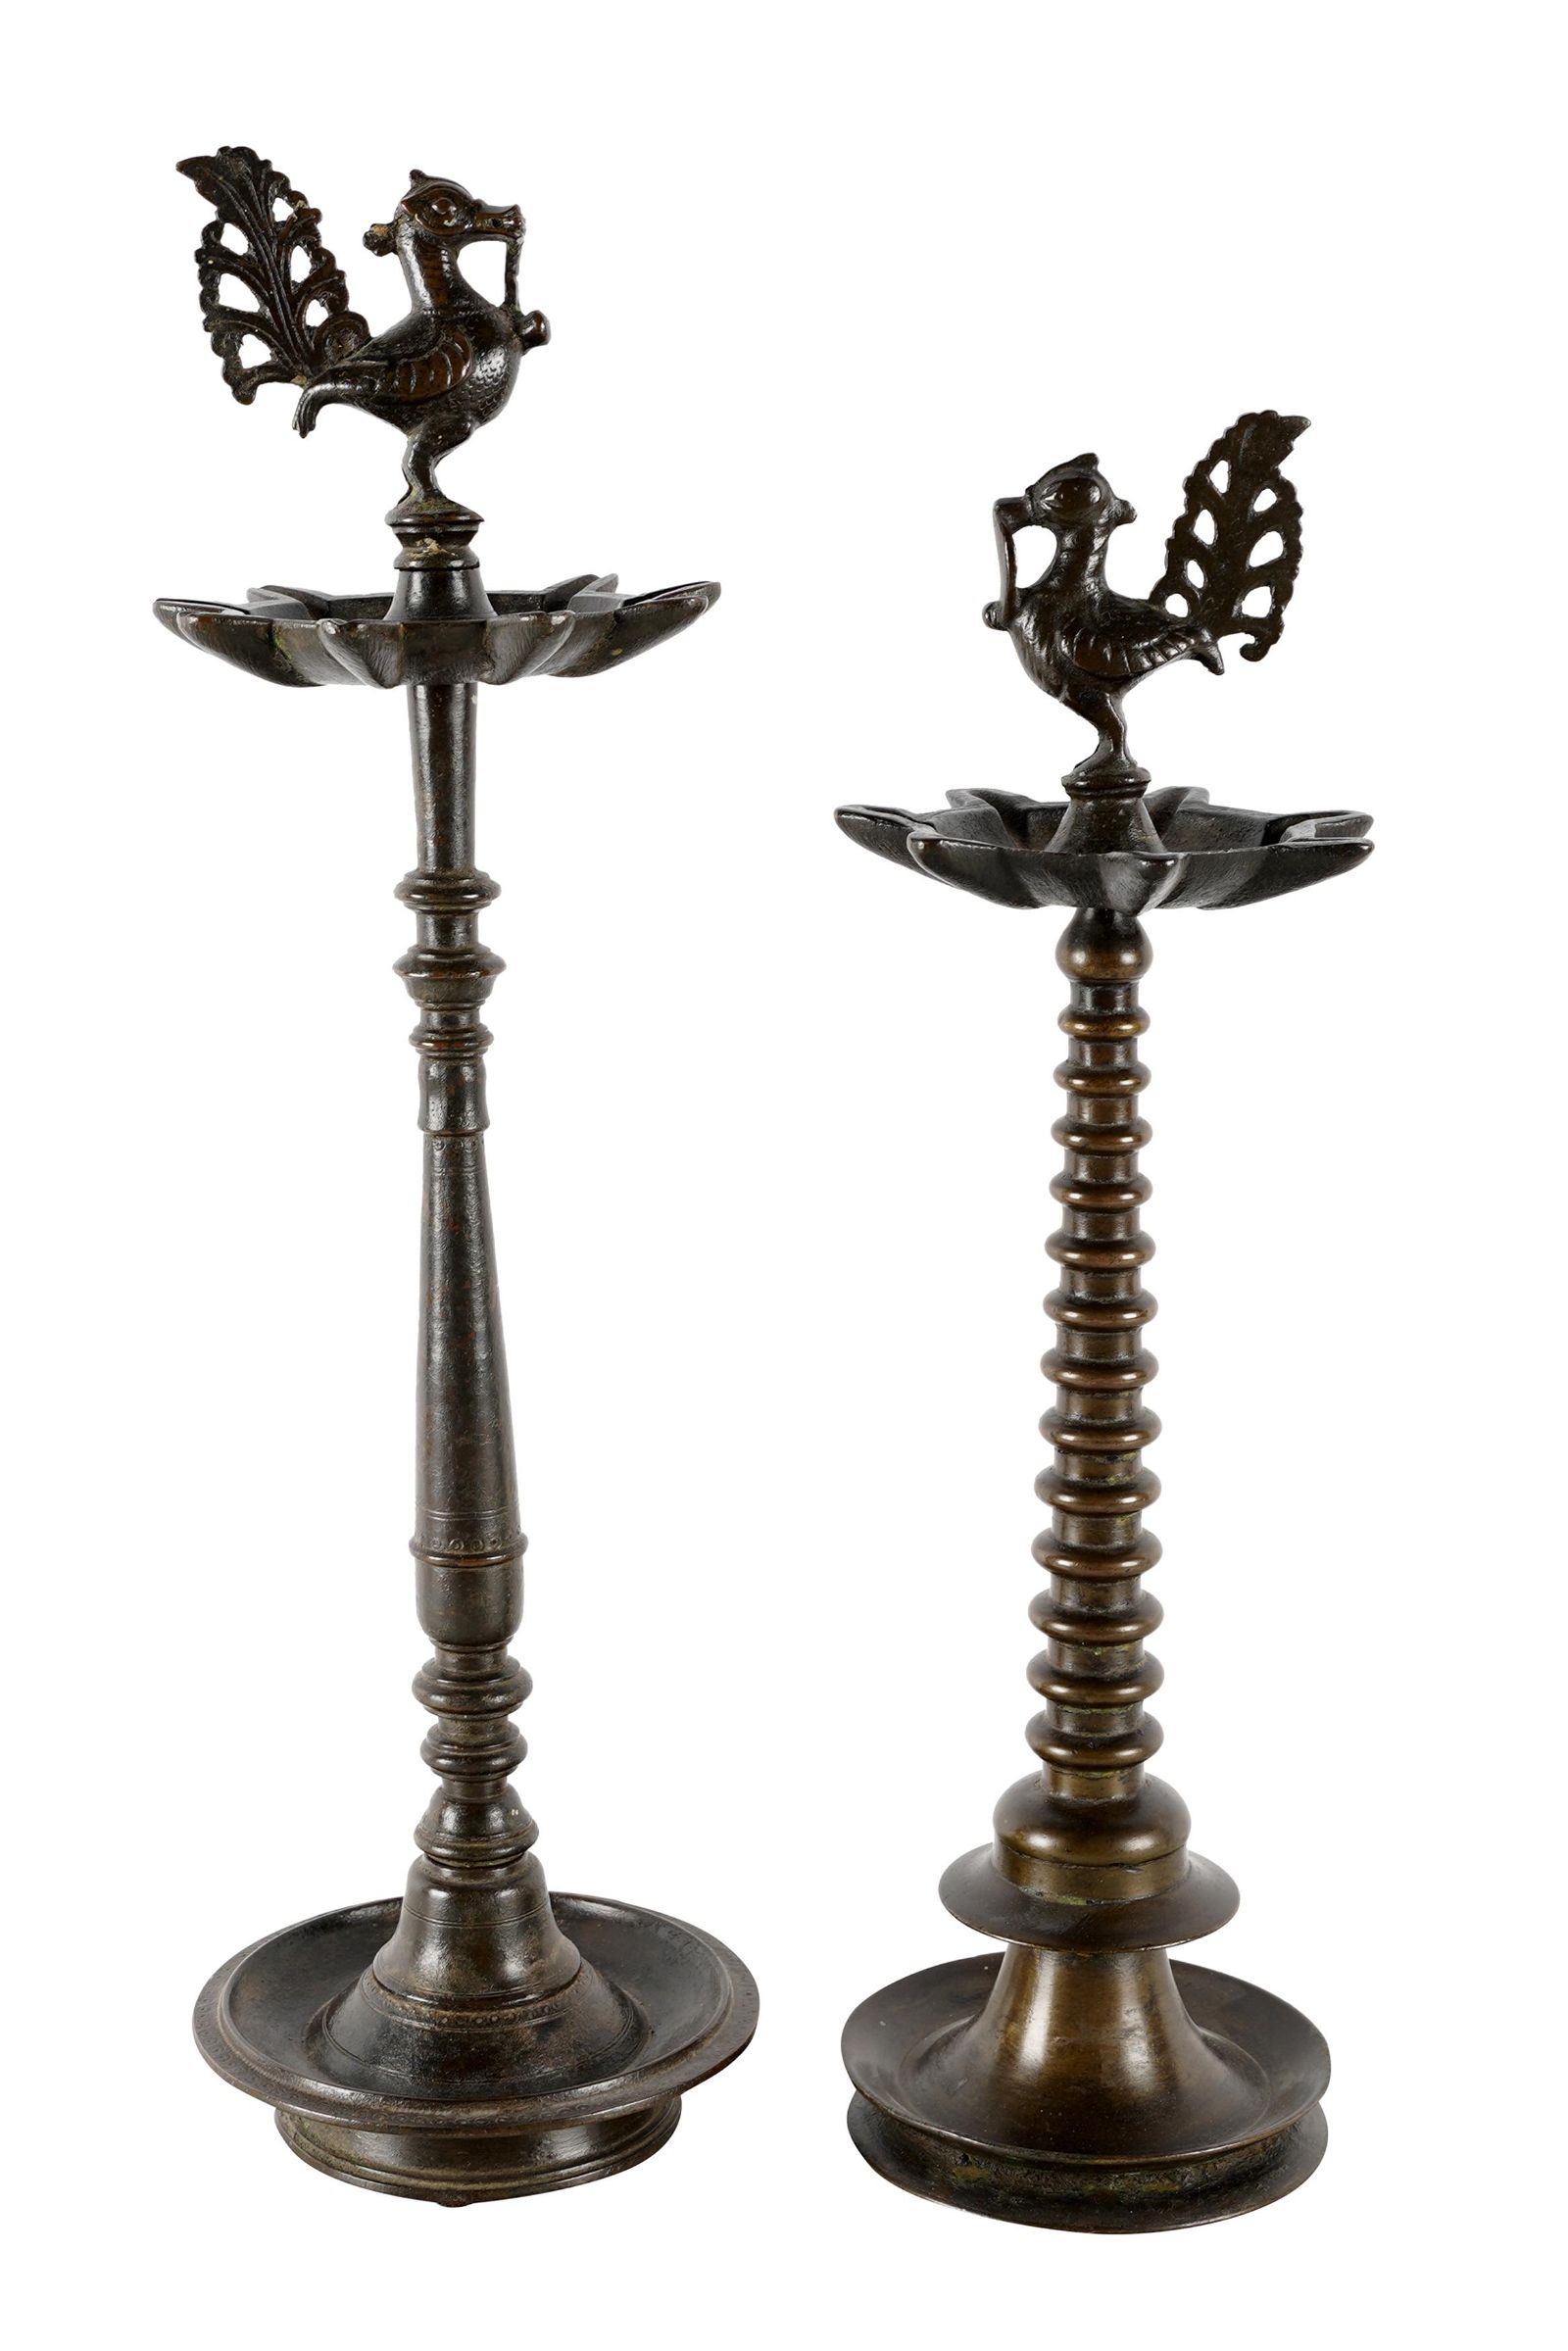 TWO INDIAN BRONZE OIL LAMPSof differing